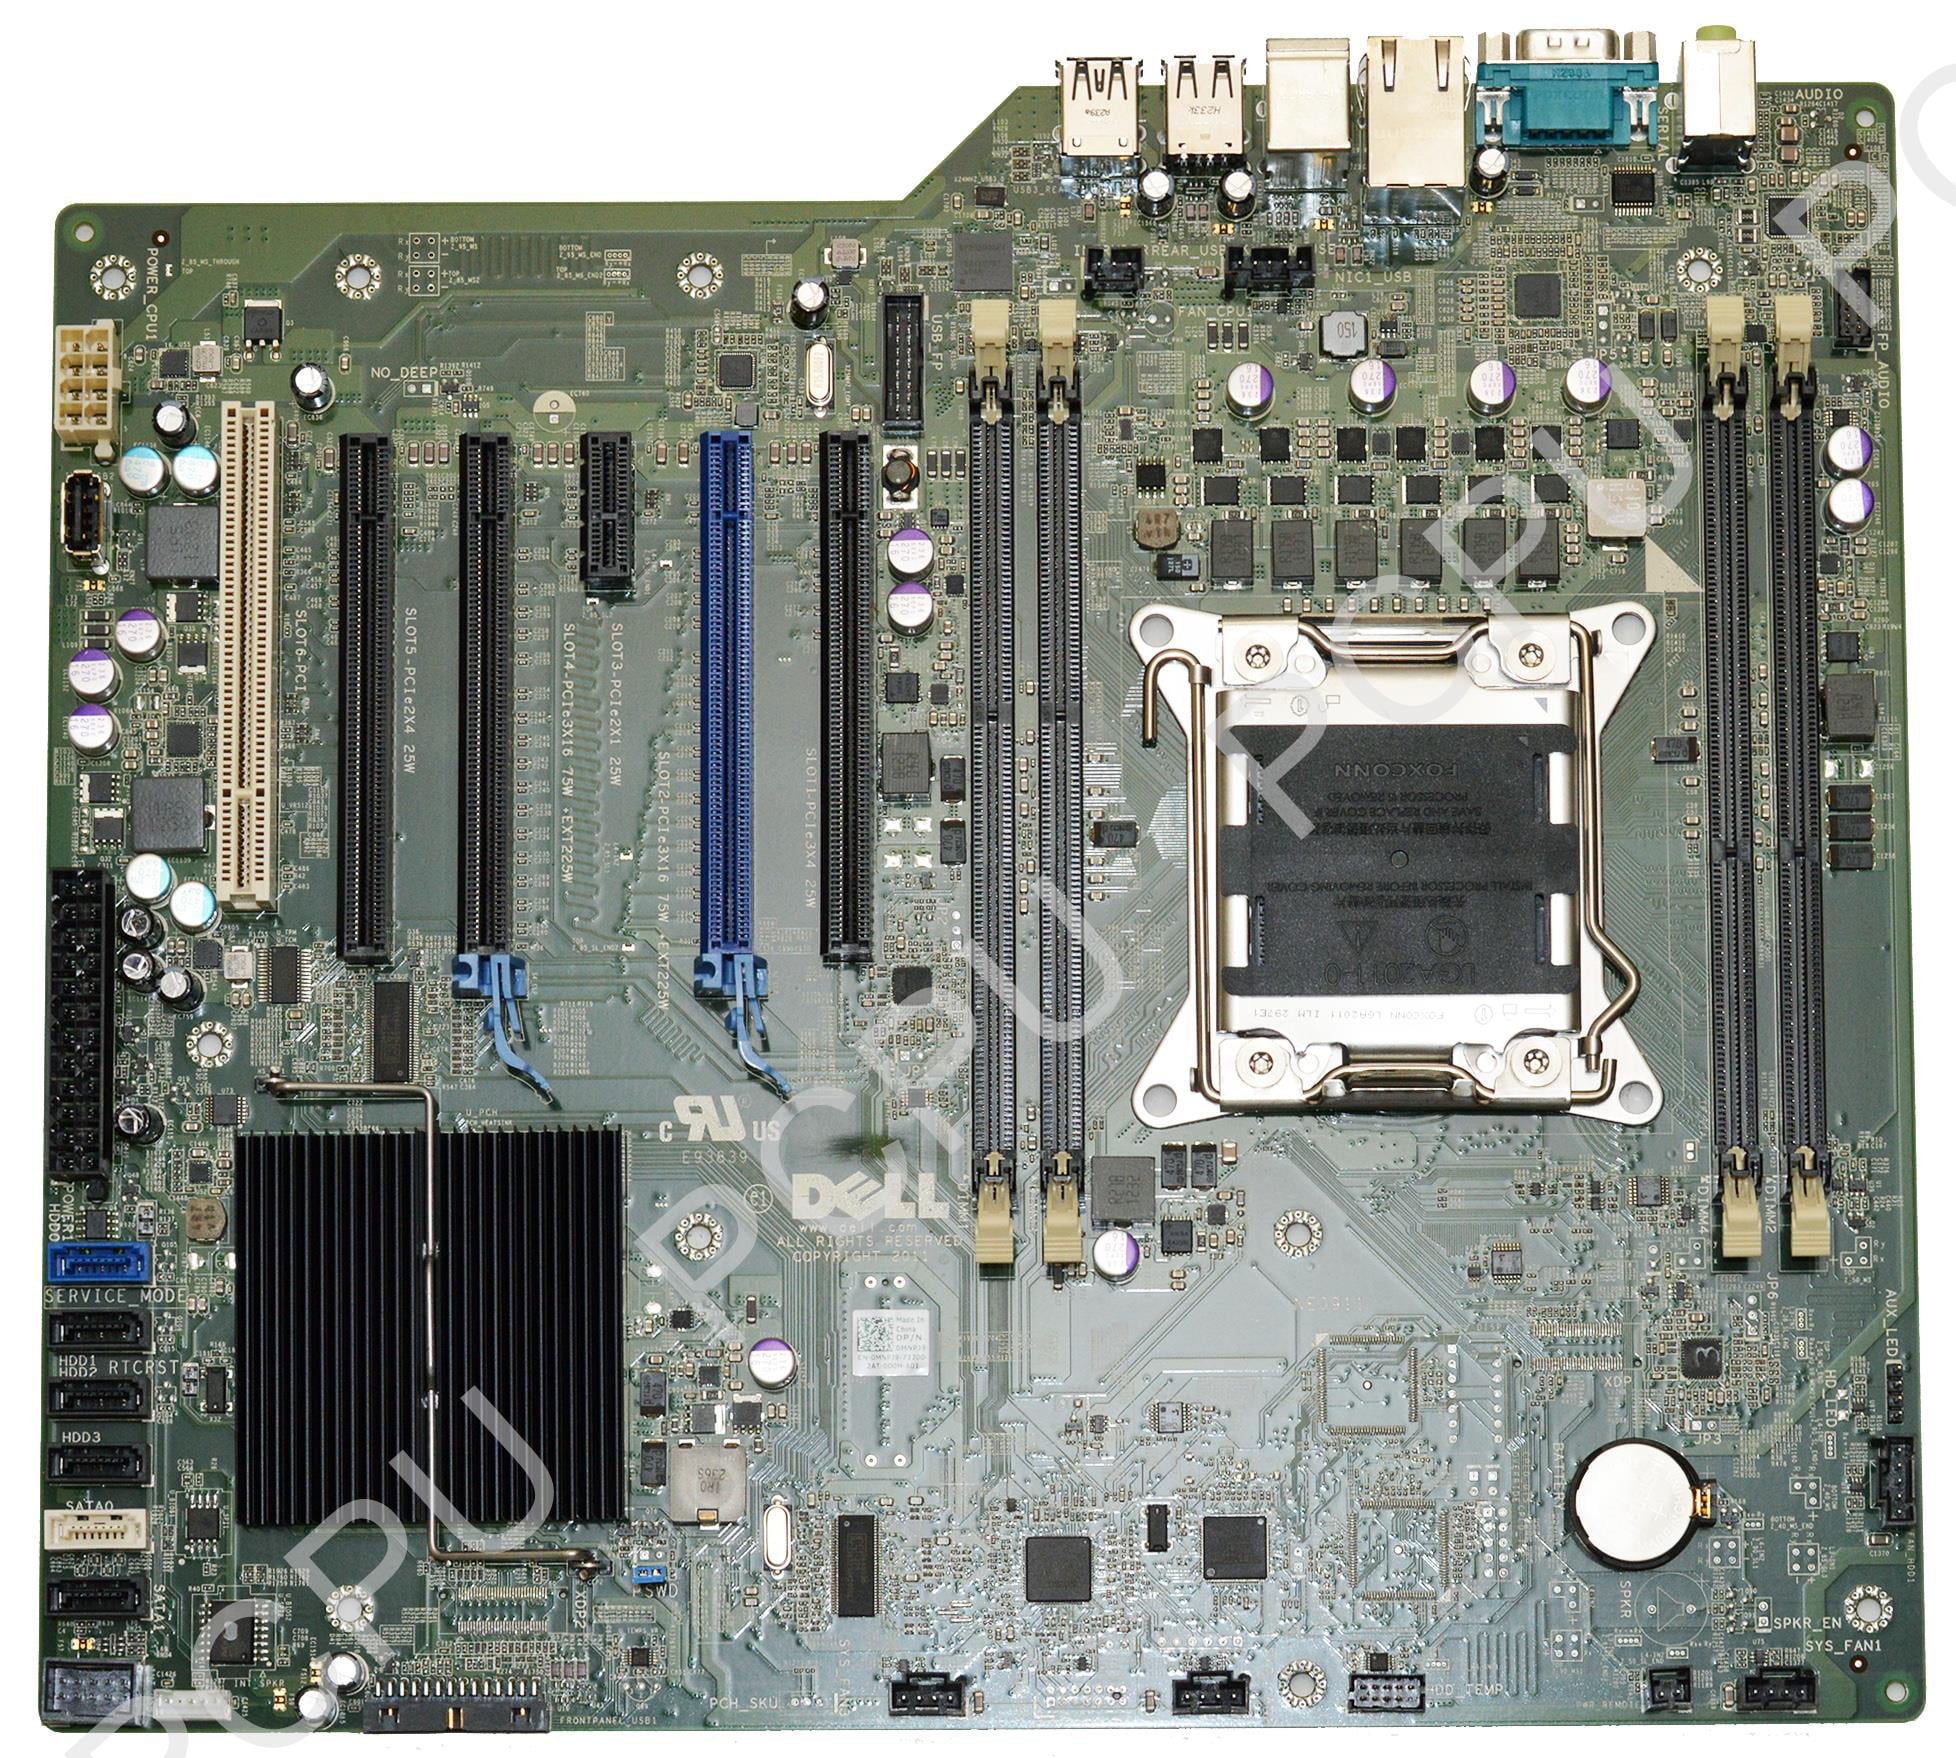 Dell T3600 Motherboard Layout - alter playground